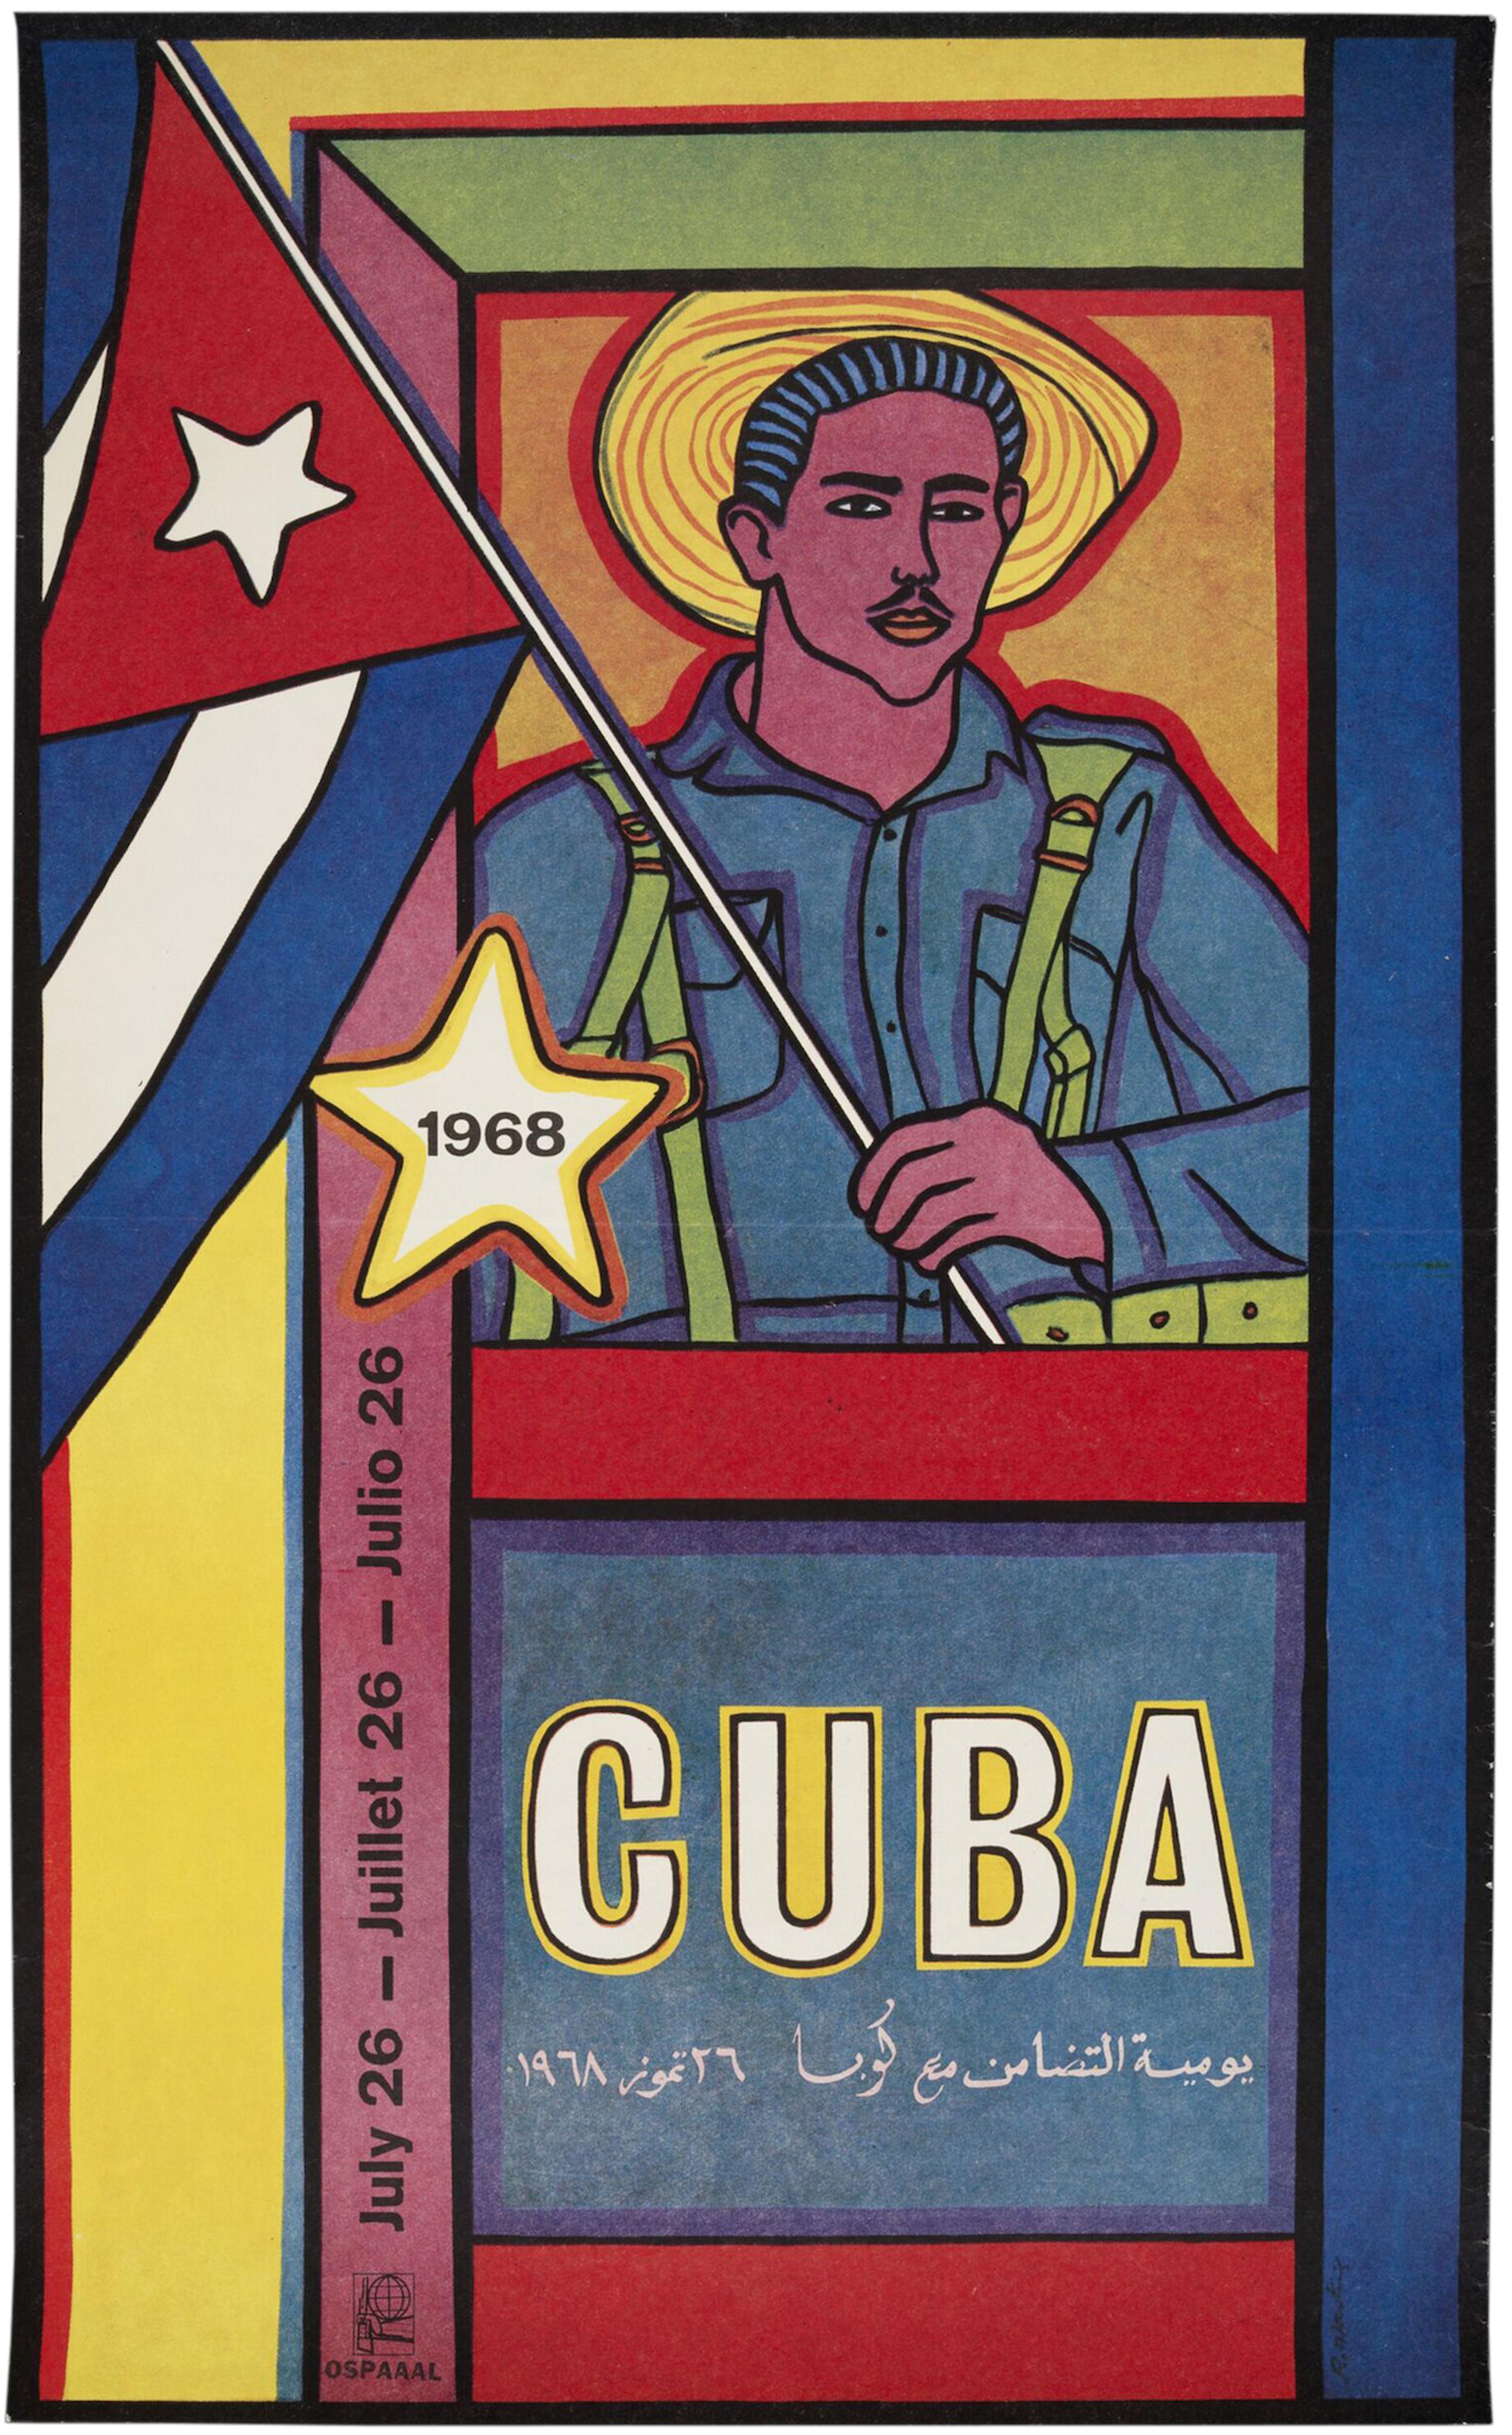 Colour offset lithograph poster with an image of a man in a hat holding a Cuban flag. Lettered with the date of the Day of World Solidarity with the Cuban Revolution (July 26), 1968 in English, French, Spanish and Arabic.